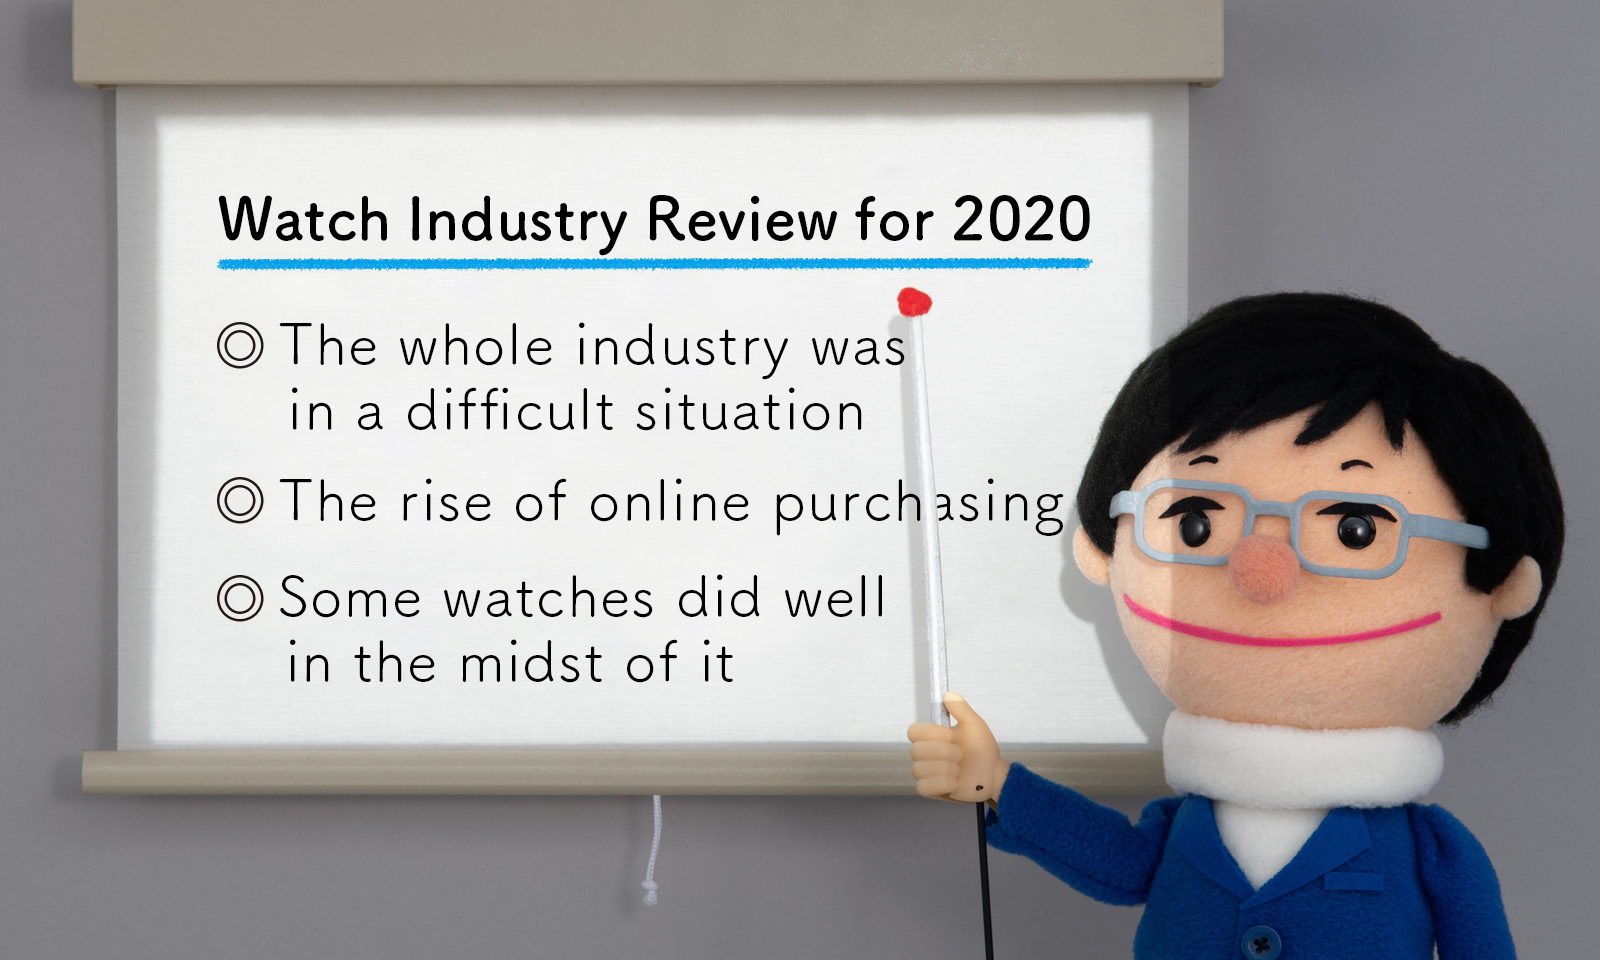 Watch Industry Review for 2020 / The whole industry was in a difficult situation / The rise of online purchasing / Some watches did well in the midst of it